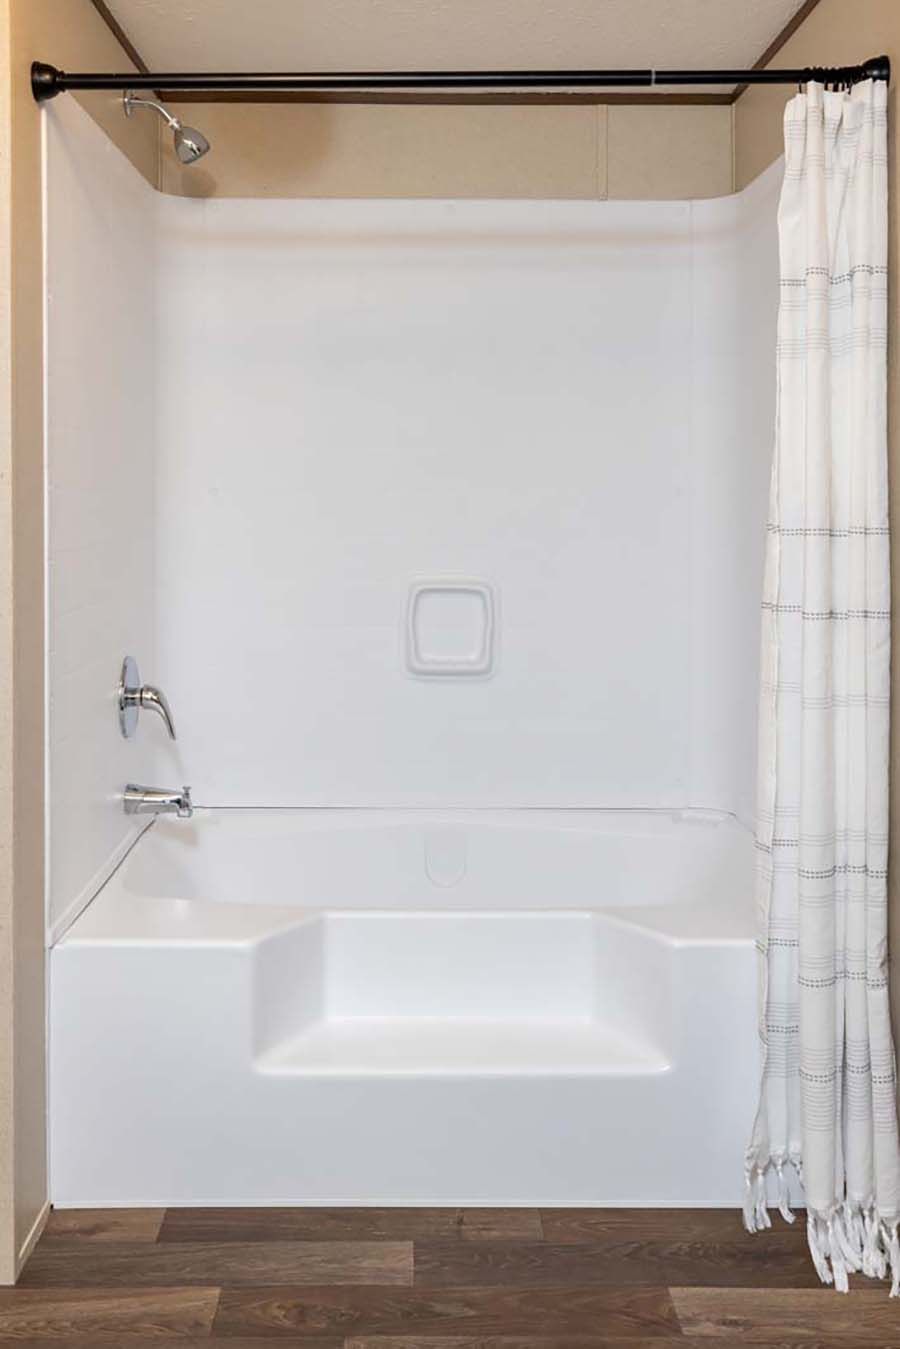 The PRIDE Primary Bathroom. This Manufactured Mobile Home features 4 bedrooms and 2 baths.